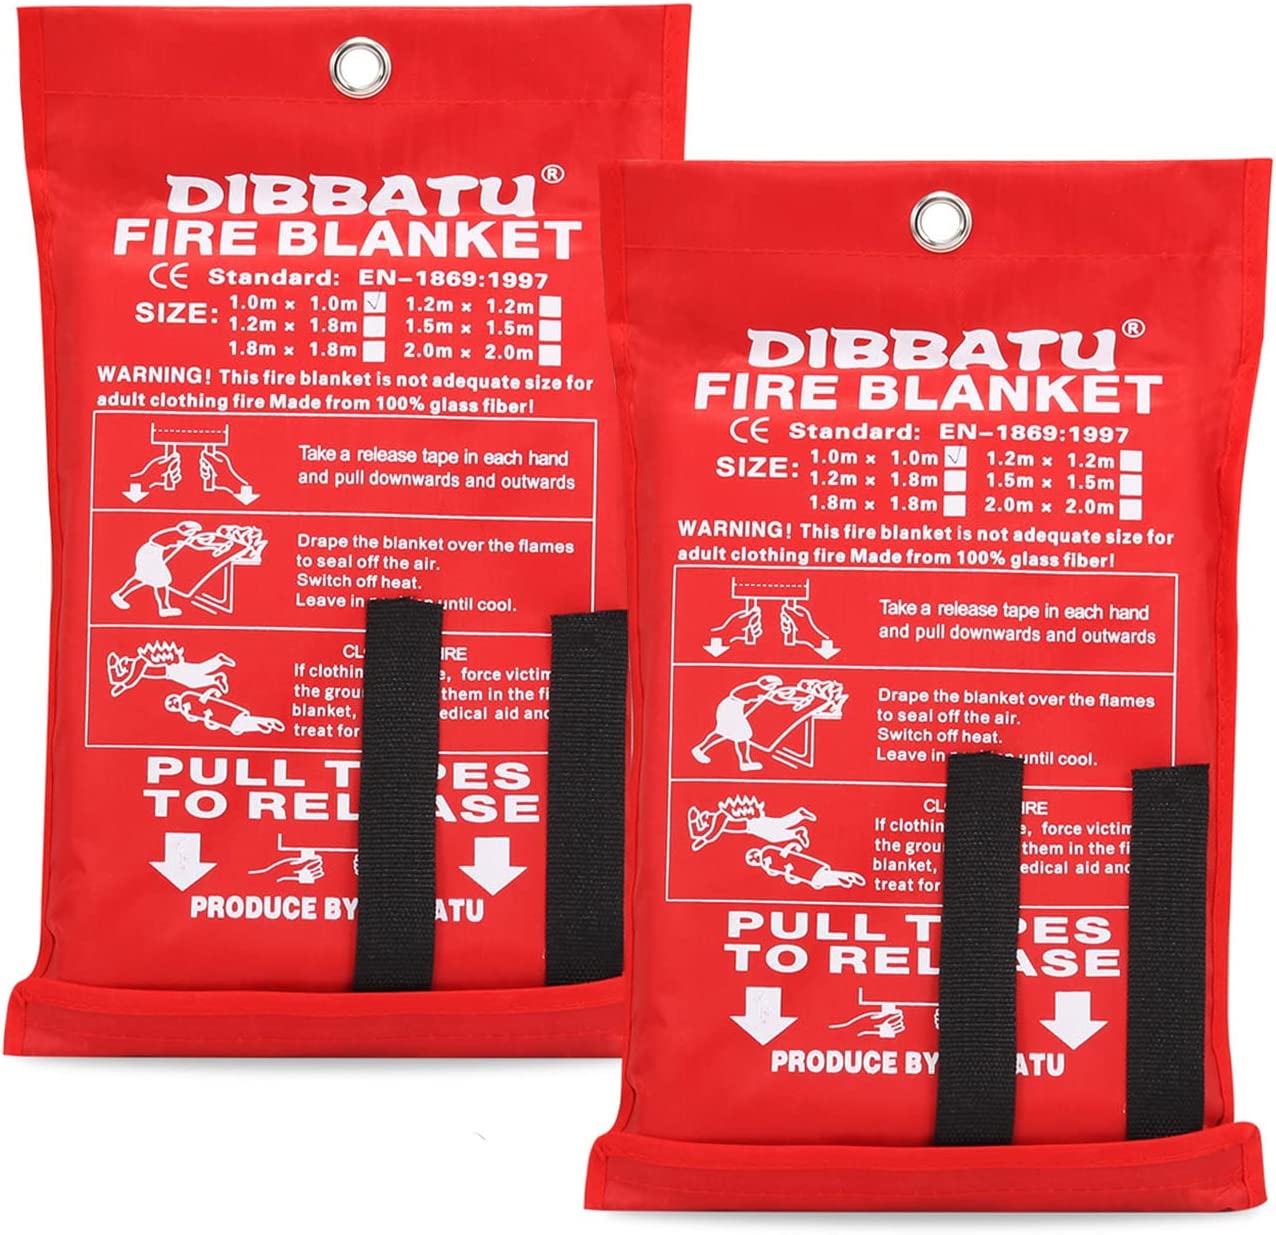 DIBBATU Fire Blanket Emergency for Kitchen, Suppression Flame Retardent Safety Blanket for Home, Schooll, Fireplace, Grill, Car, Office, Warehouse (39 in x 39 in)